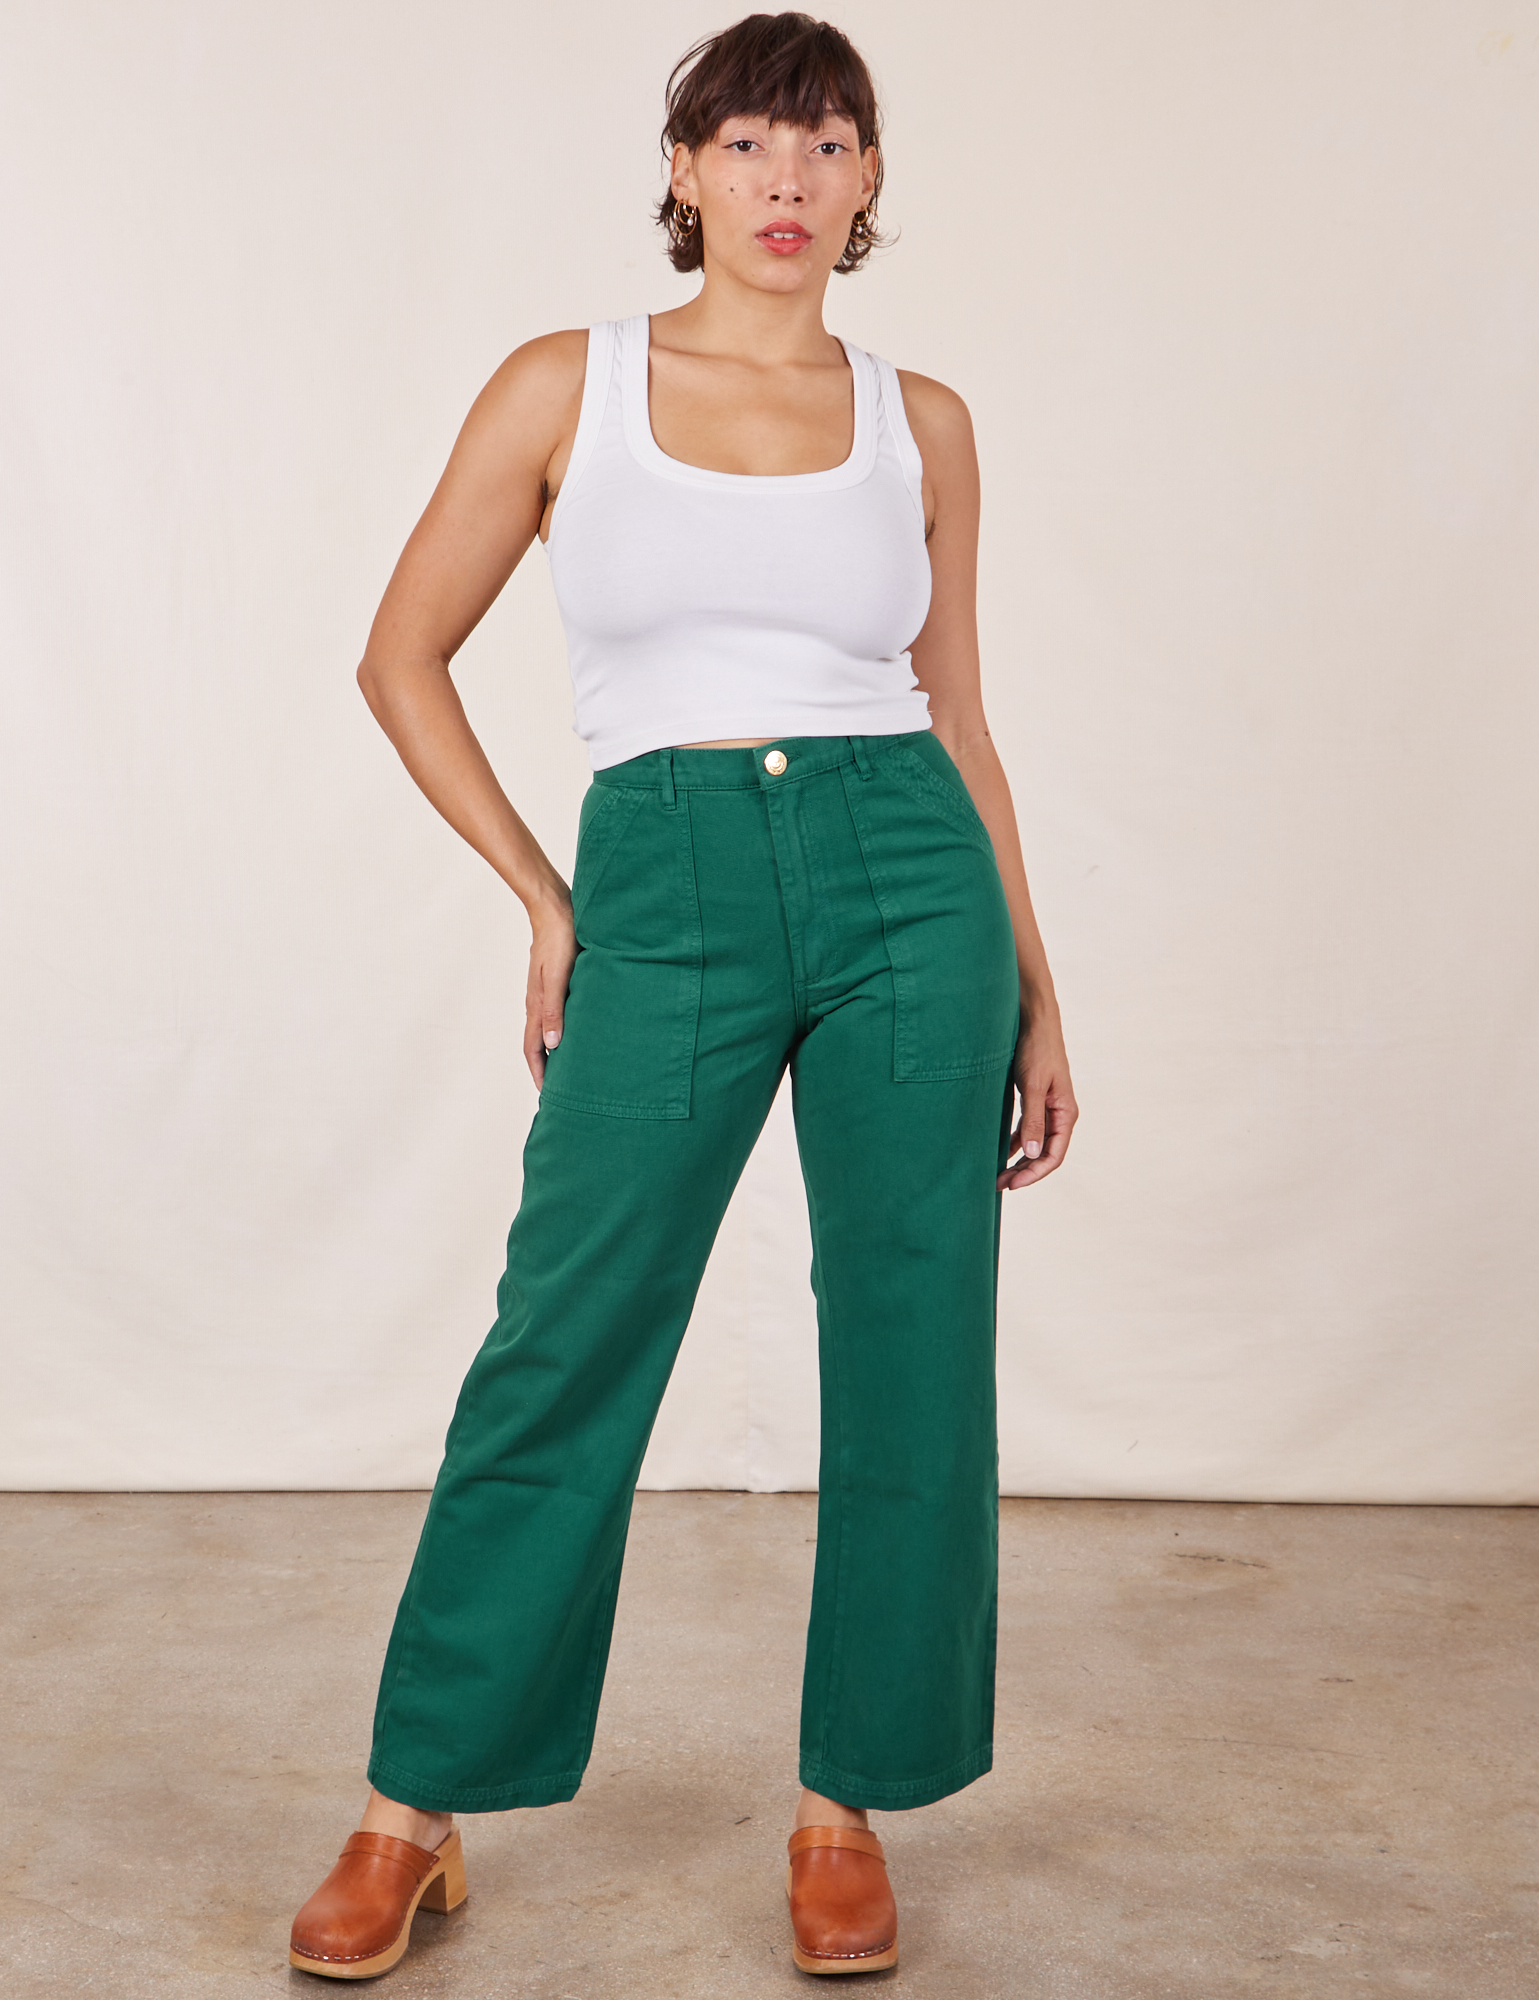 Tiara is 5&#39;5&quot; and wearing S Work Pants in Hunter Green paired with vintage off-white Tank Top